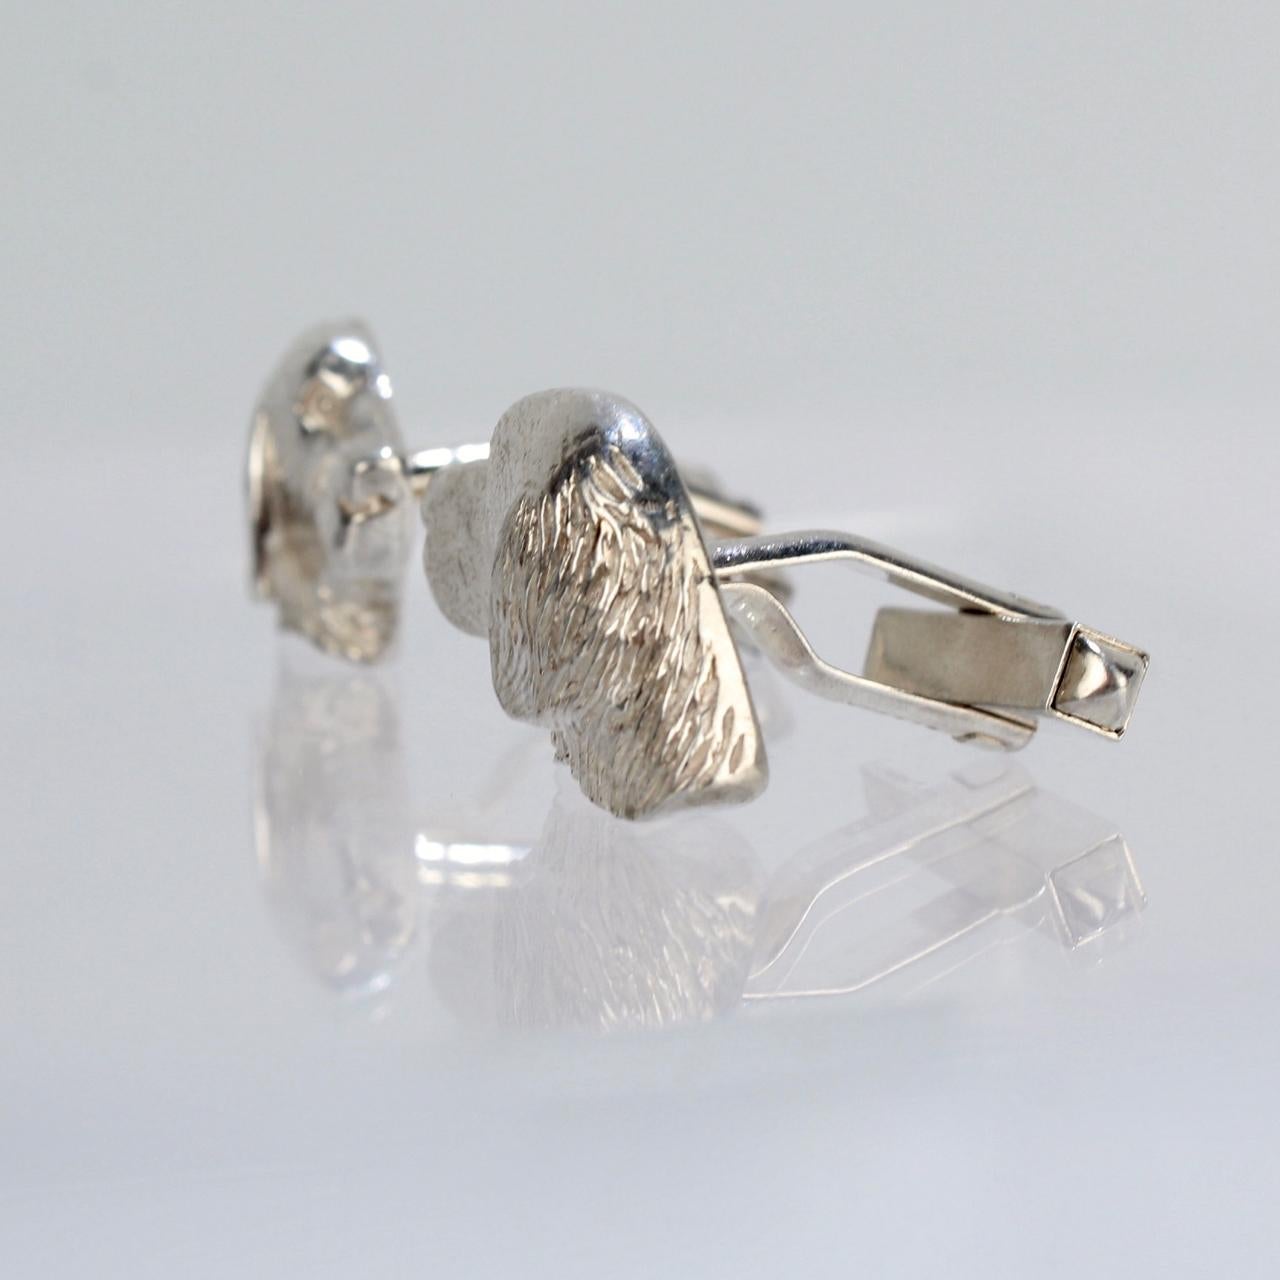 A fine pair of sterling silver hunt-related cufflinks in the form of a Golden Retrievers in profile.

Marked for Holland & Holland -  the storied London Gunmakers and & Sportsman company.

Simply the perfect accessory for the Sportsman or Golden